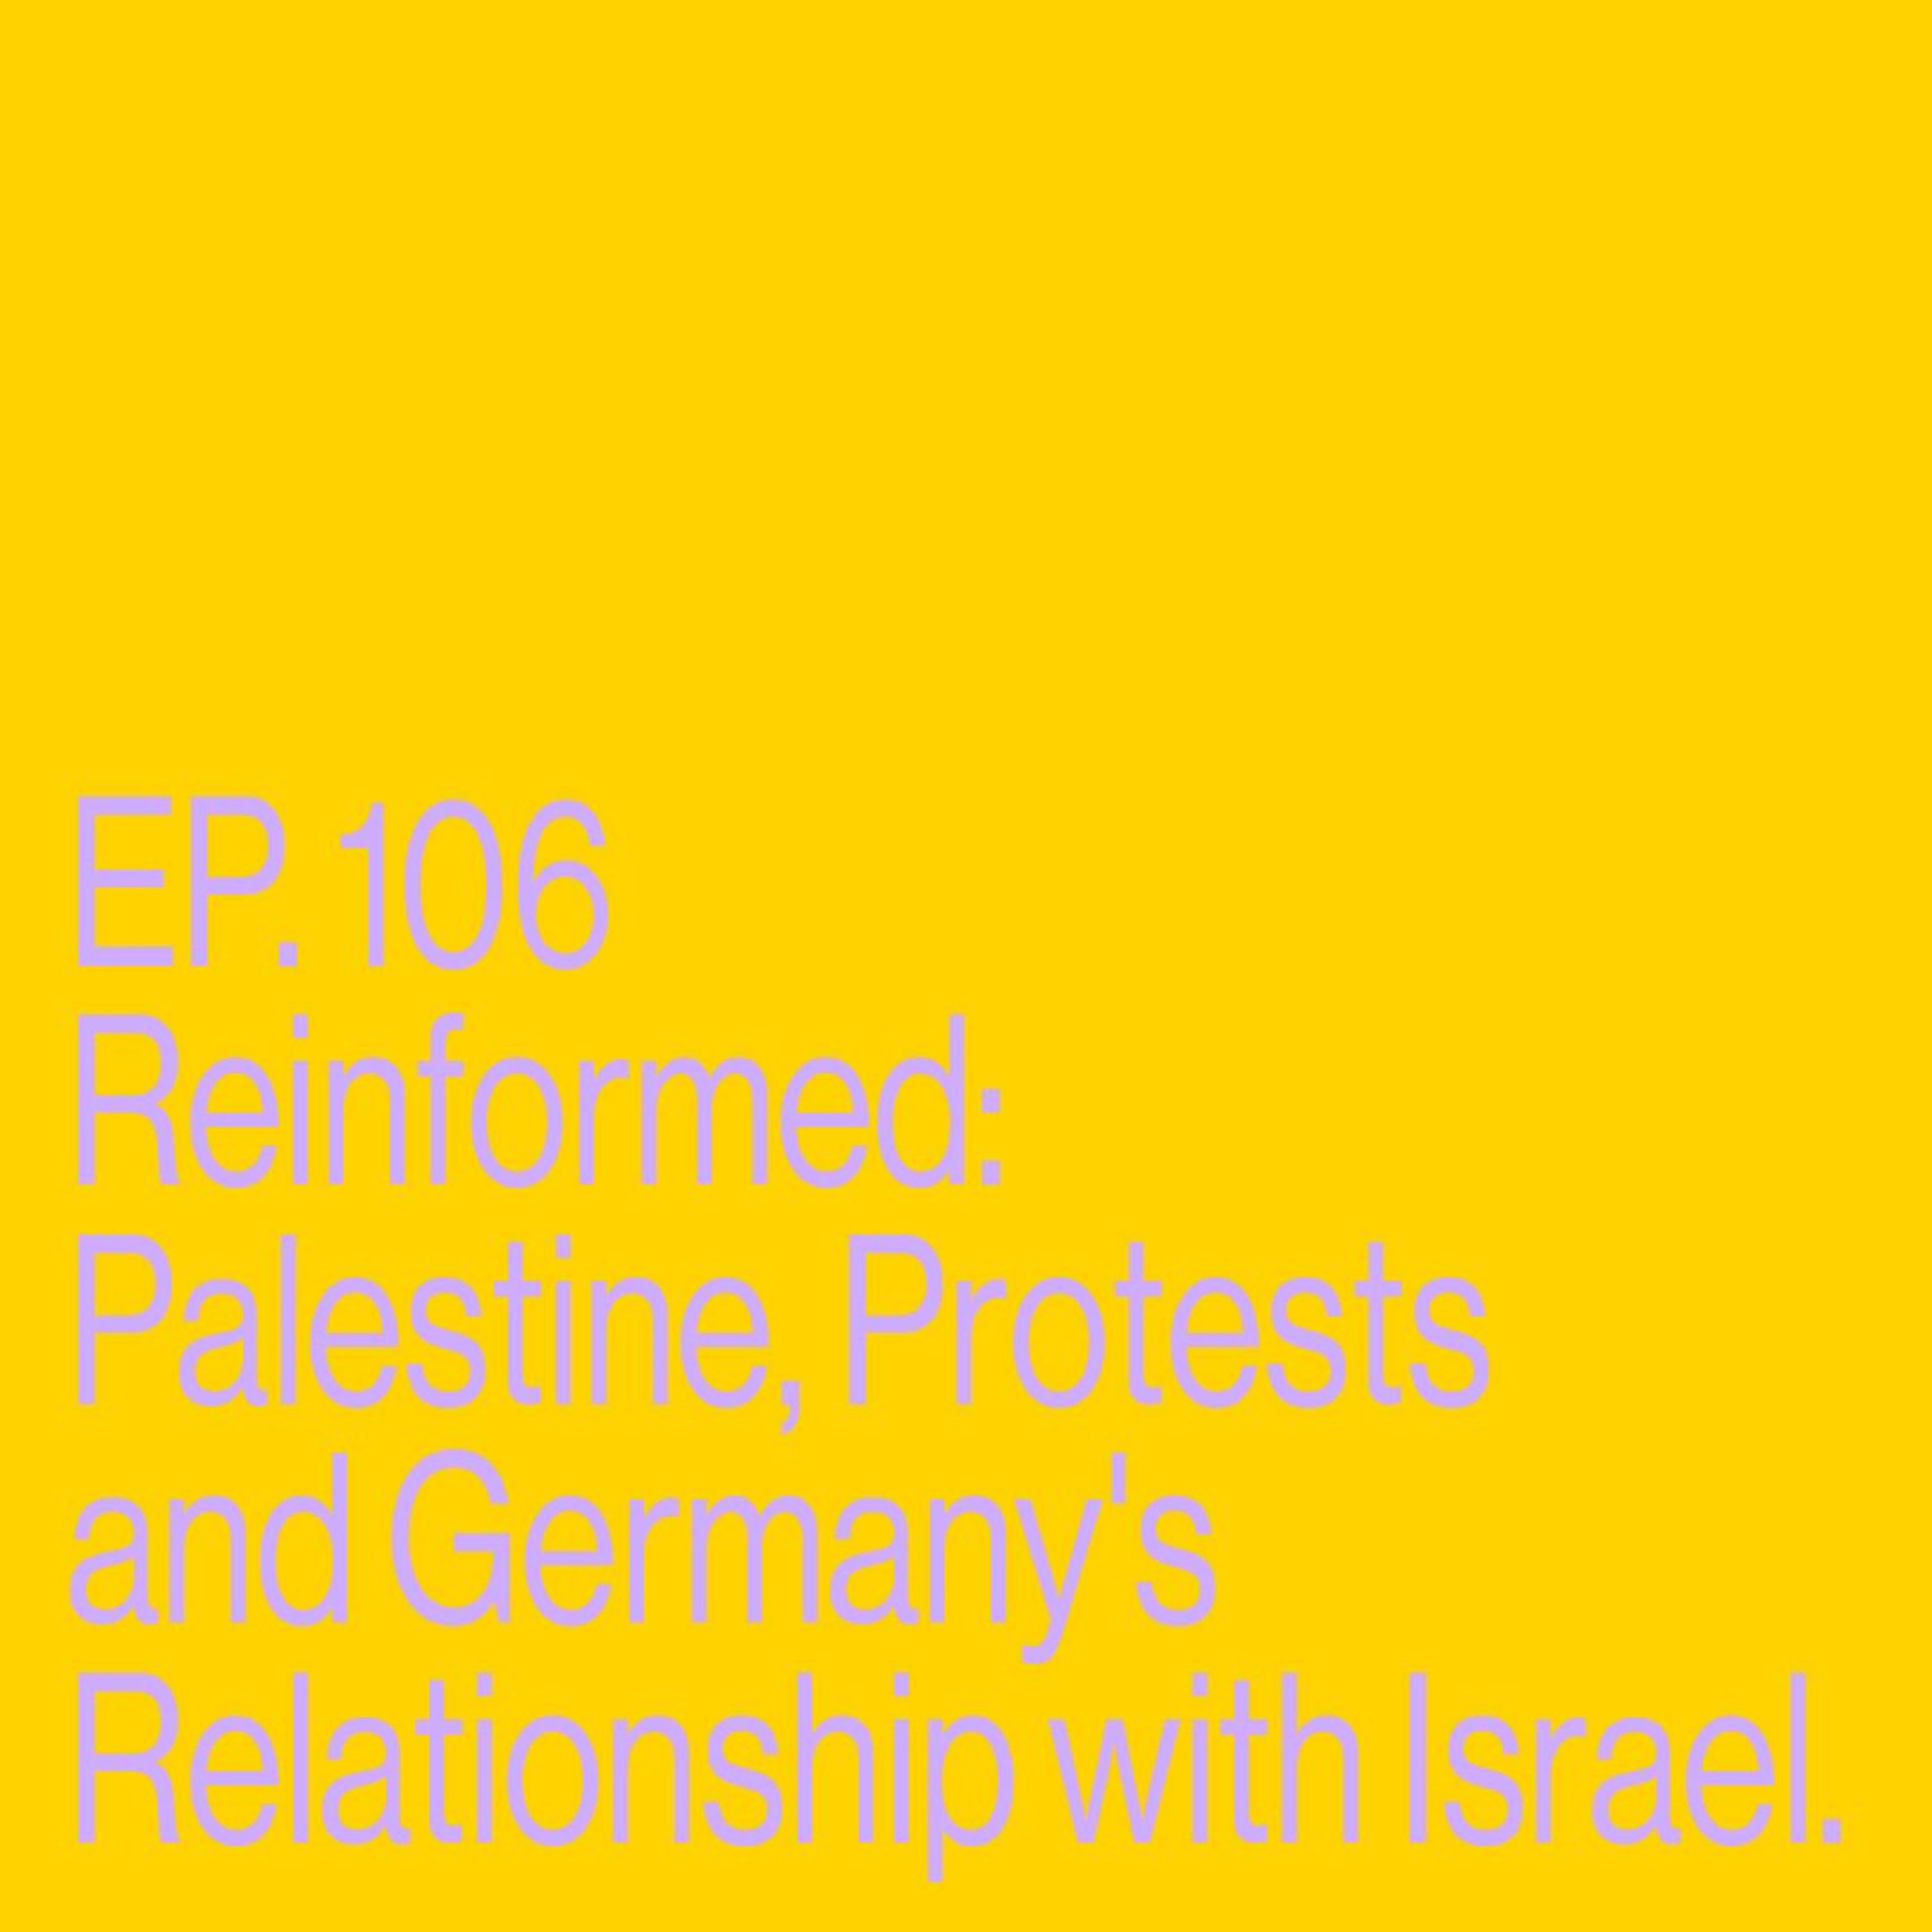 Episode 106 Reinformed: Palestine, Protests, and Germany's Relationship with Israel